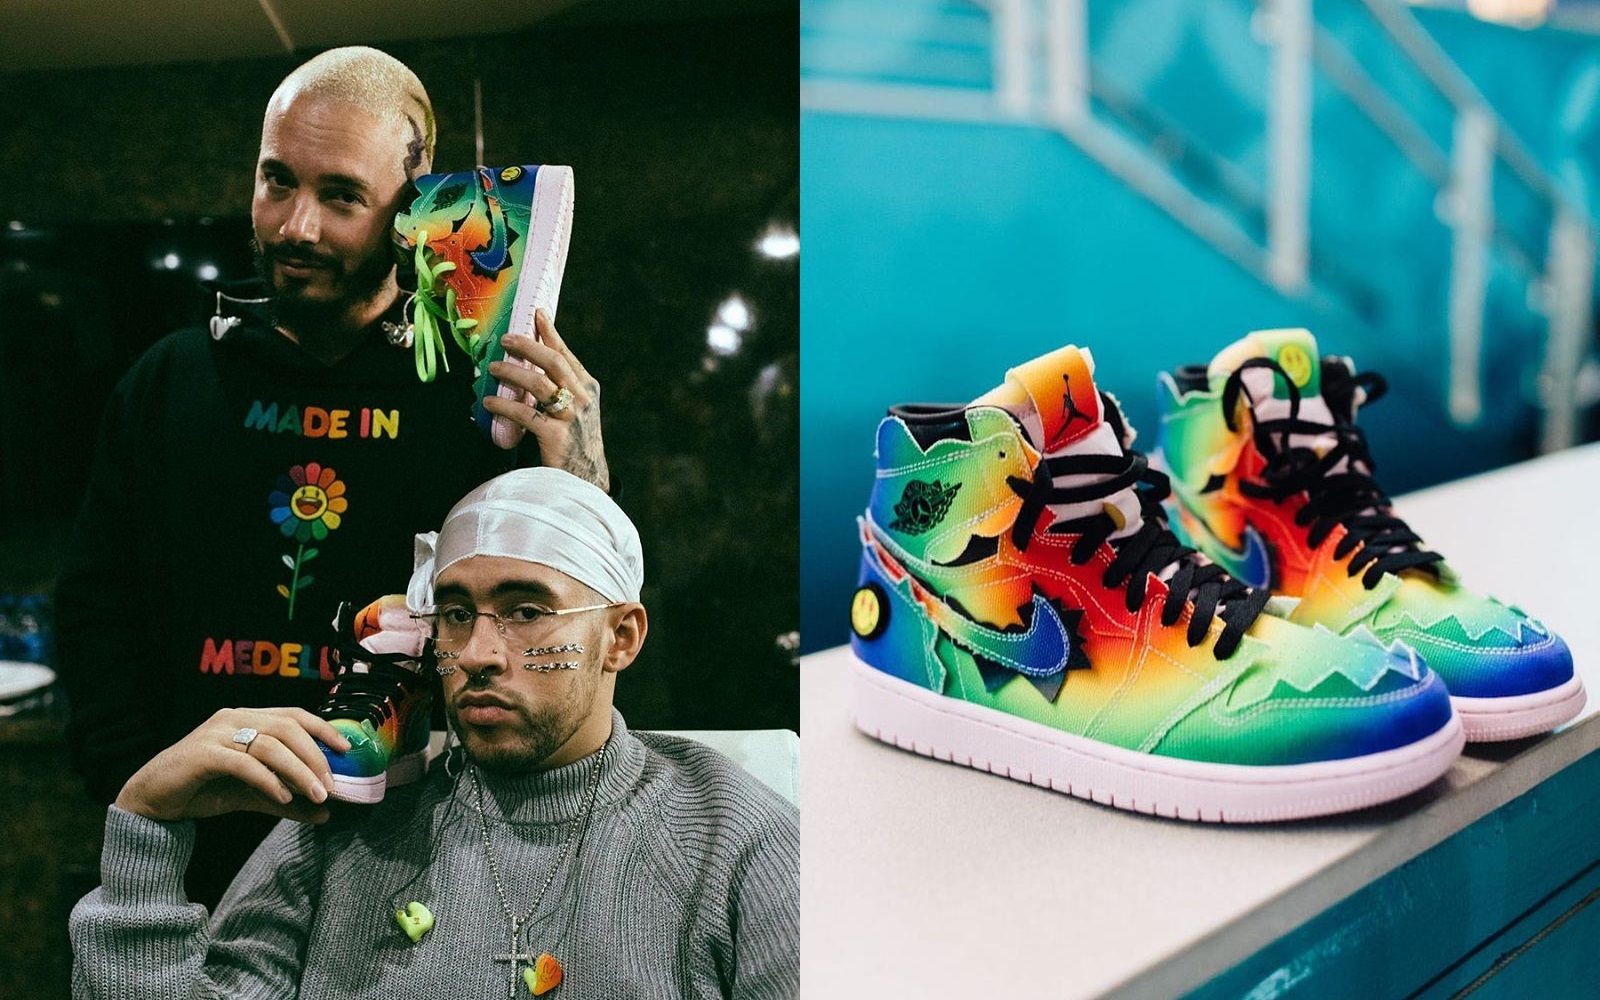 Why the J Balvin x Air Jordan 1 Is Important for Latinx Culture